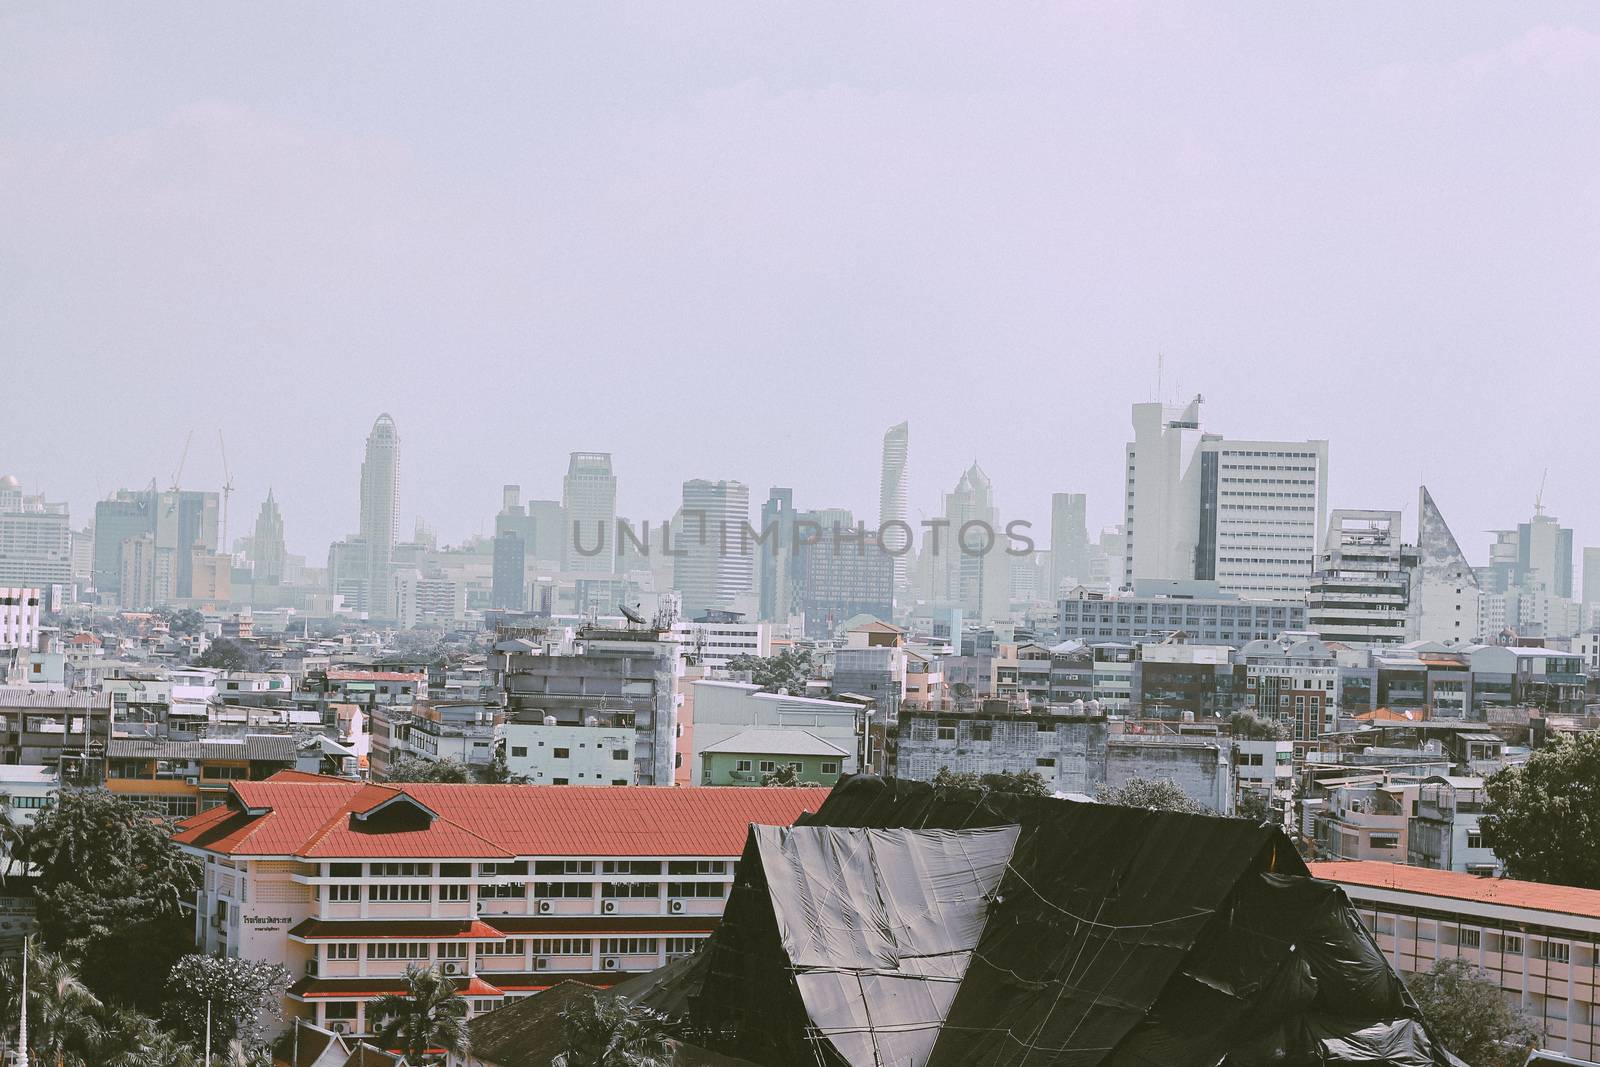 Crowded skyline of Bangkok, Thailand by Sonnet15